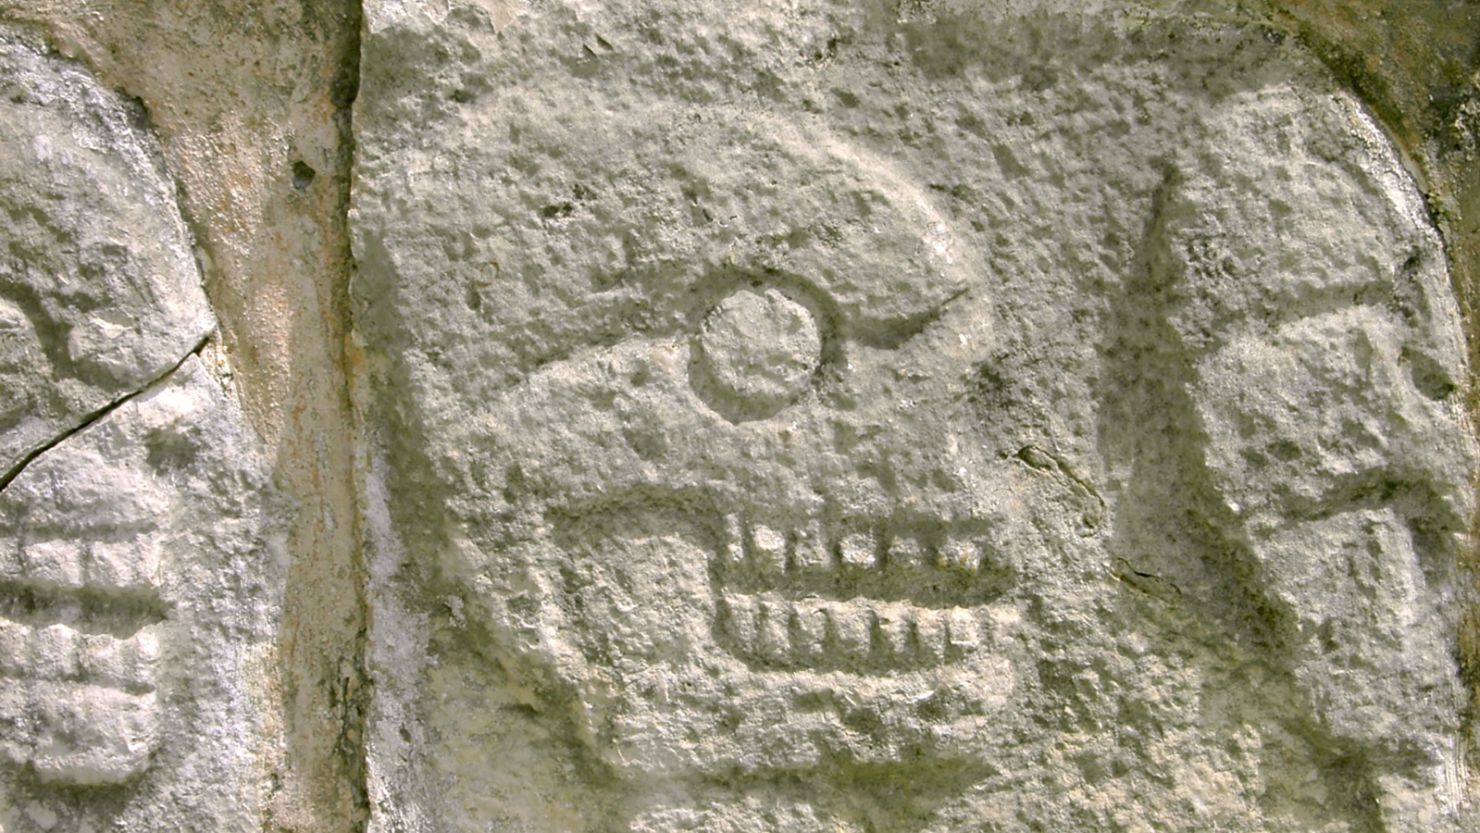 A detail from a reconstructed stone tzompantli, or skull rack, is pictured at Chichén Itzá, an ancient Maya city where human sacrifice was commonplace.